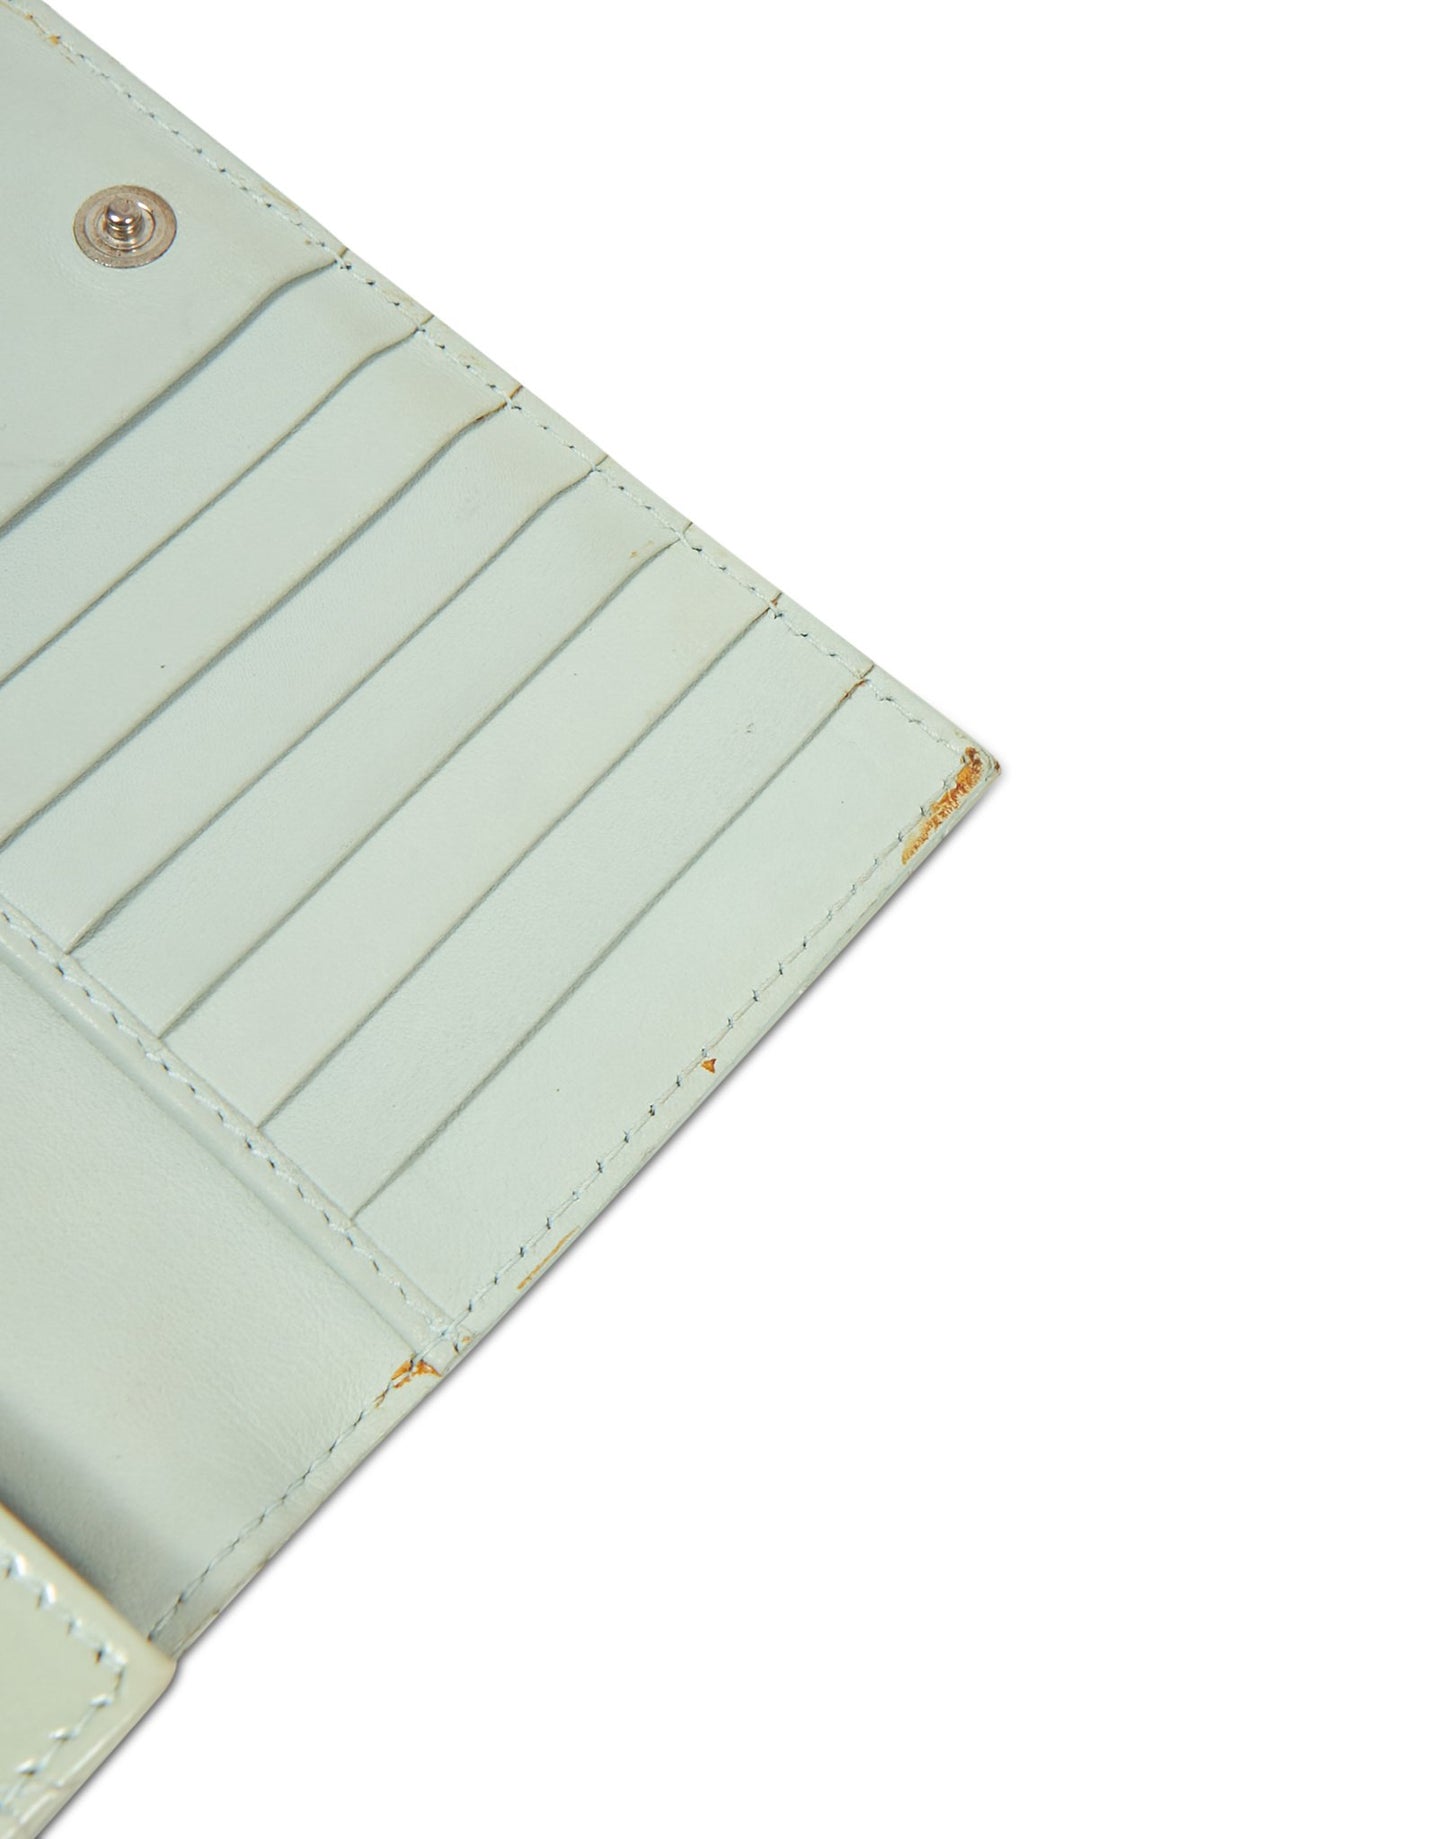 Dior Green Iridescent Patent Cannage Long Wallet